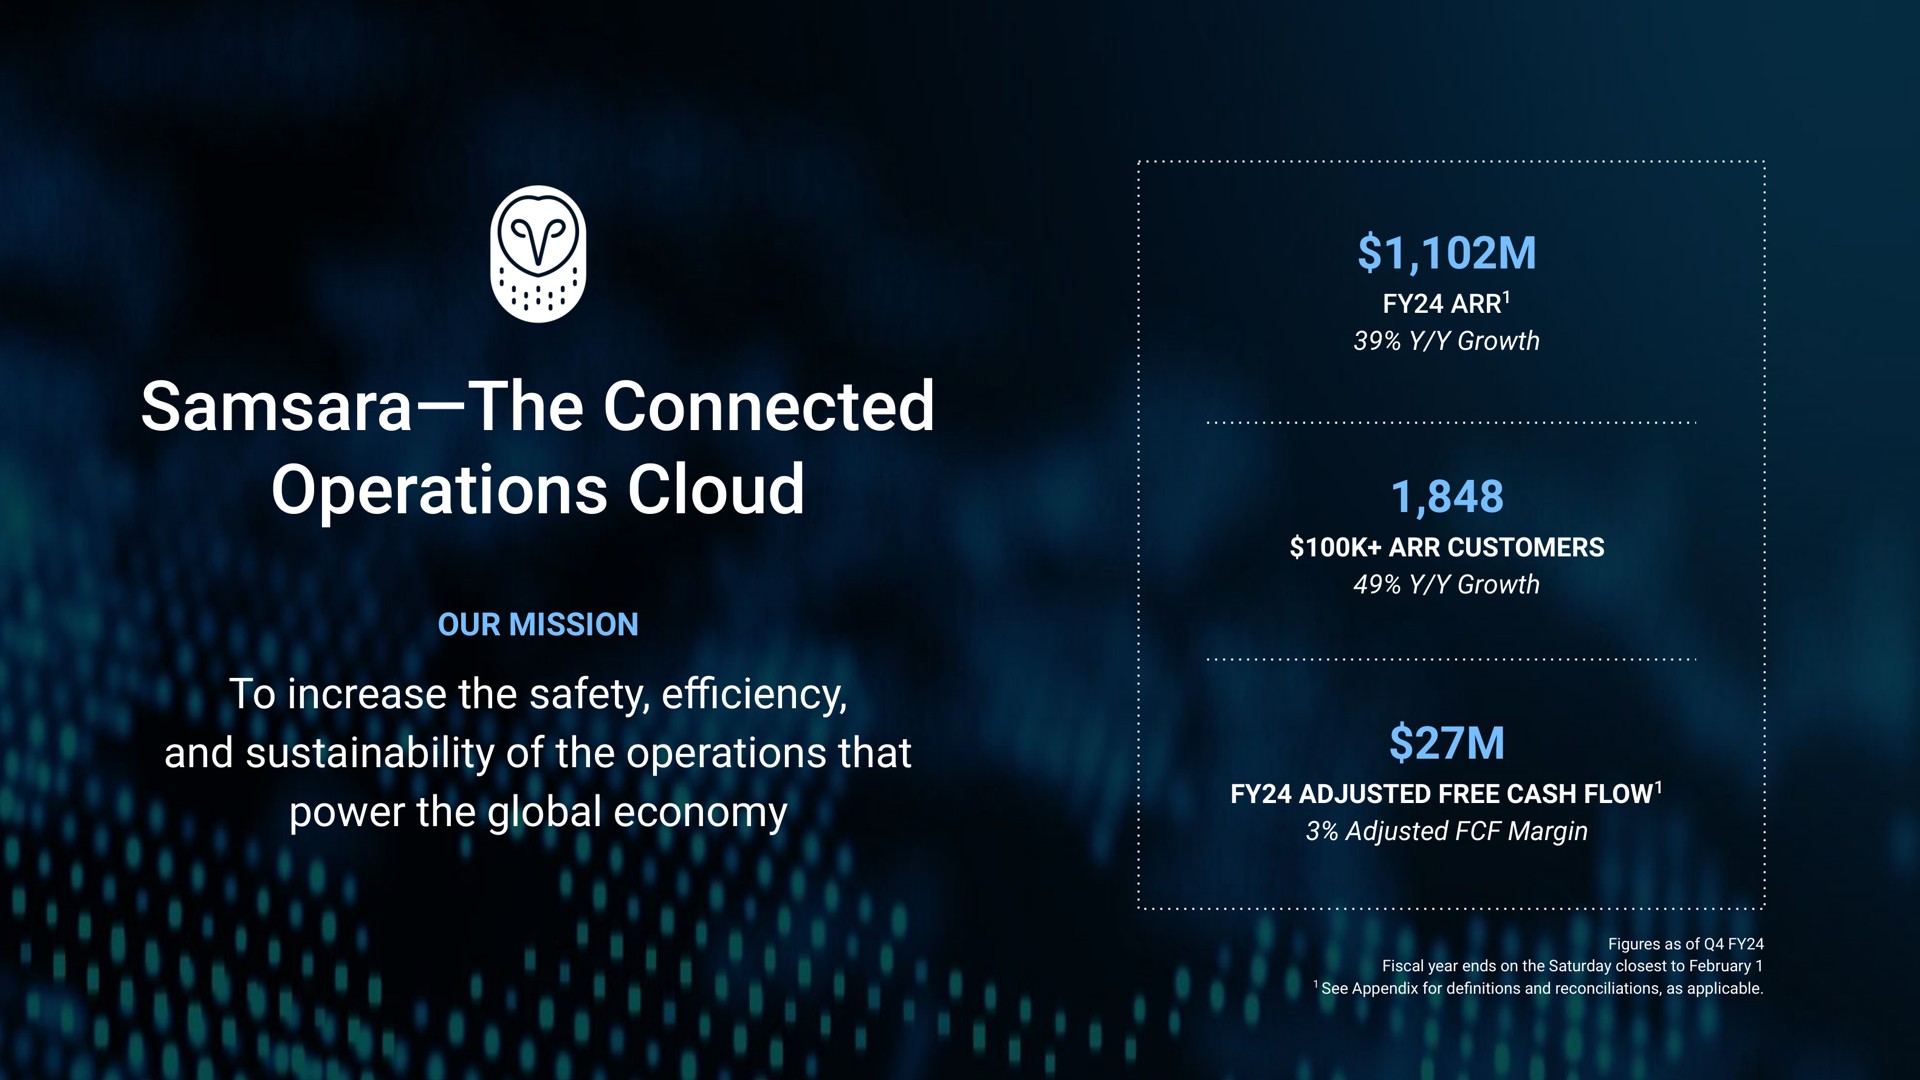 samsara the connected operations cloud and of that power global economy | Samsara